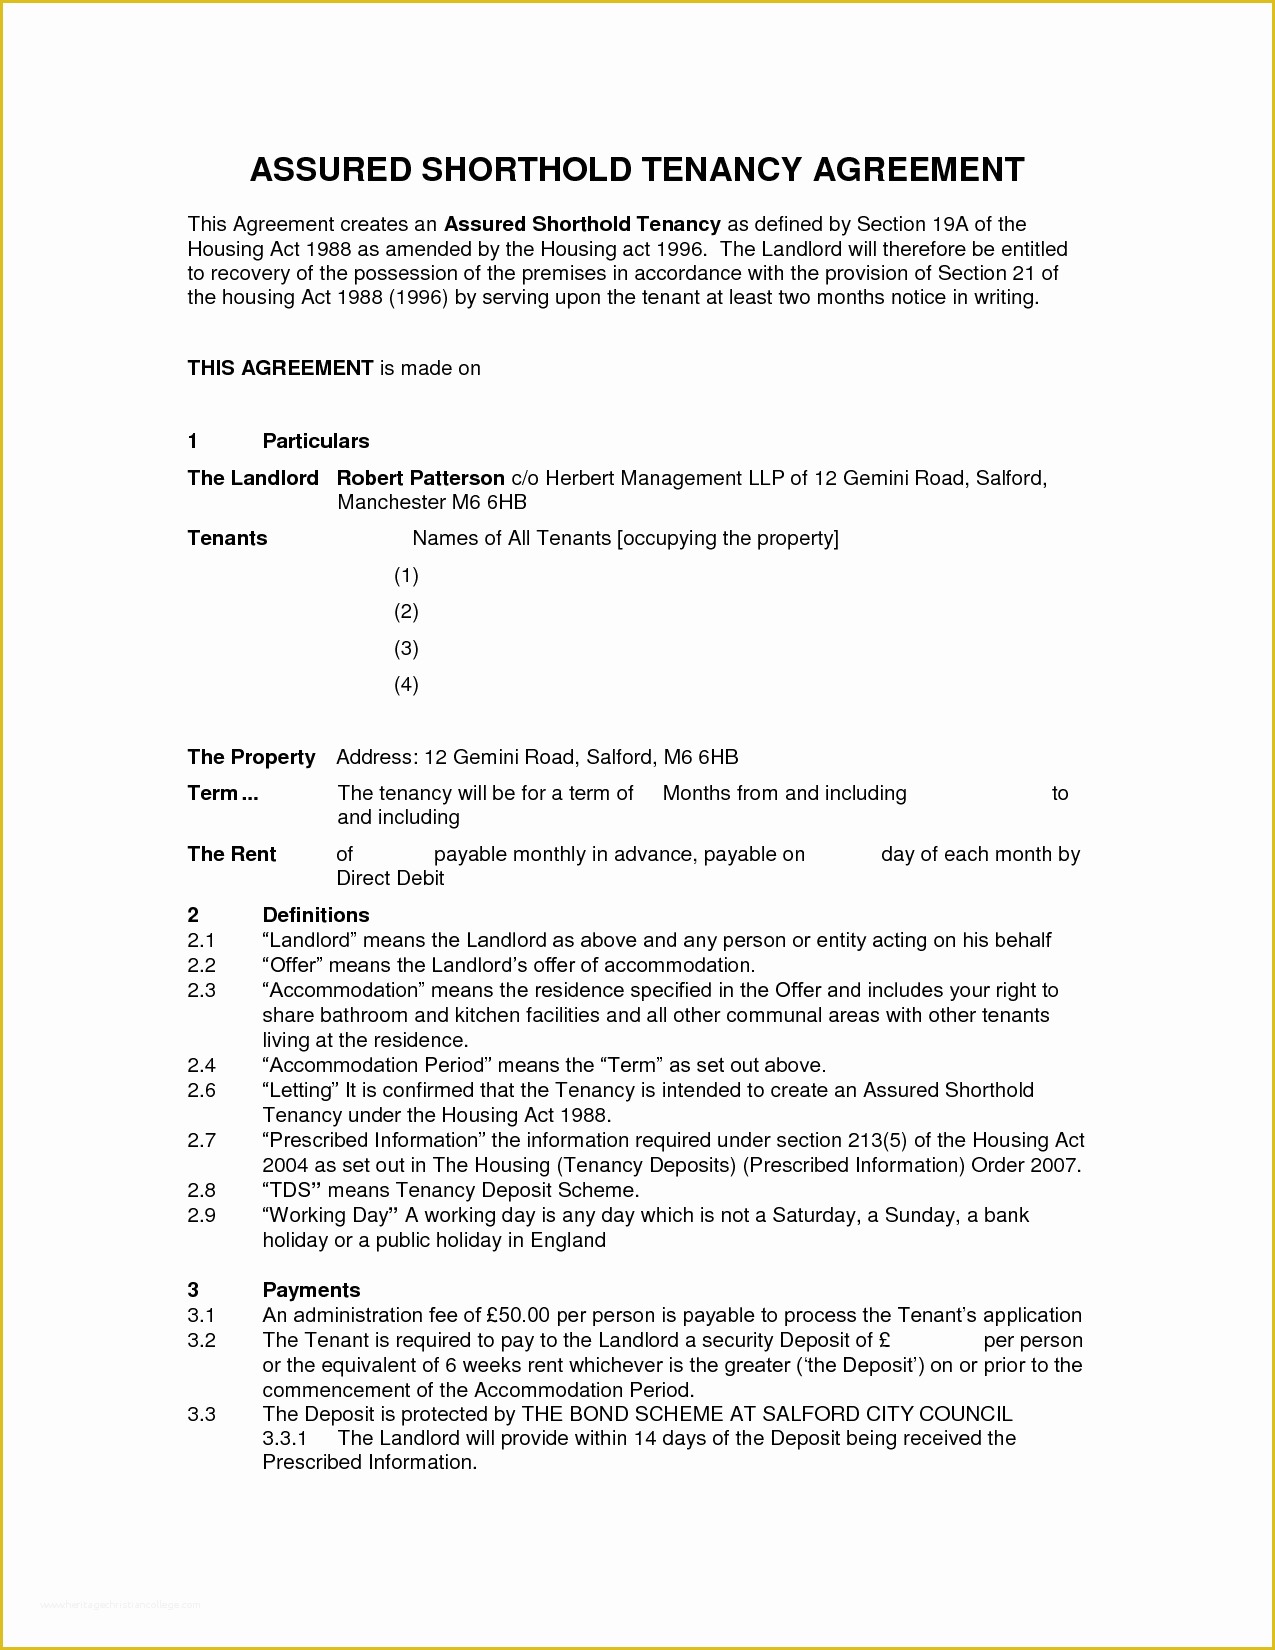 Tenancy Agreement form Template Free Of Short assured Tenancy Agreement Template England